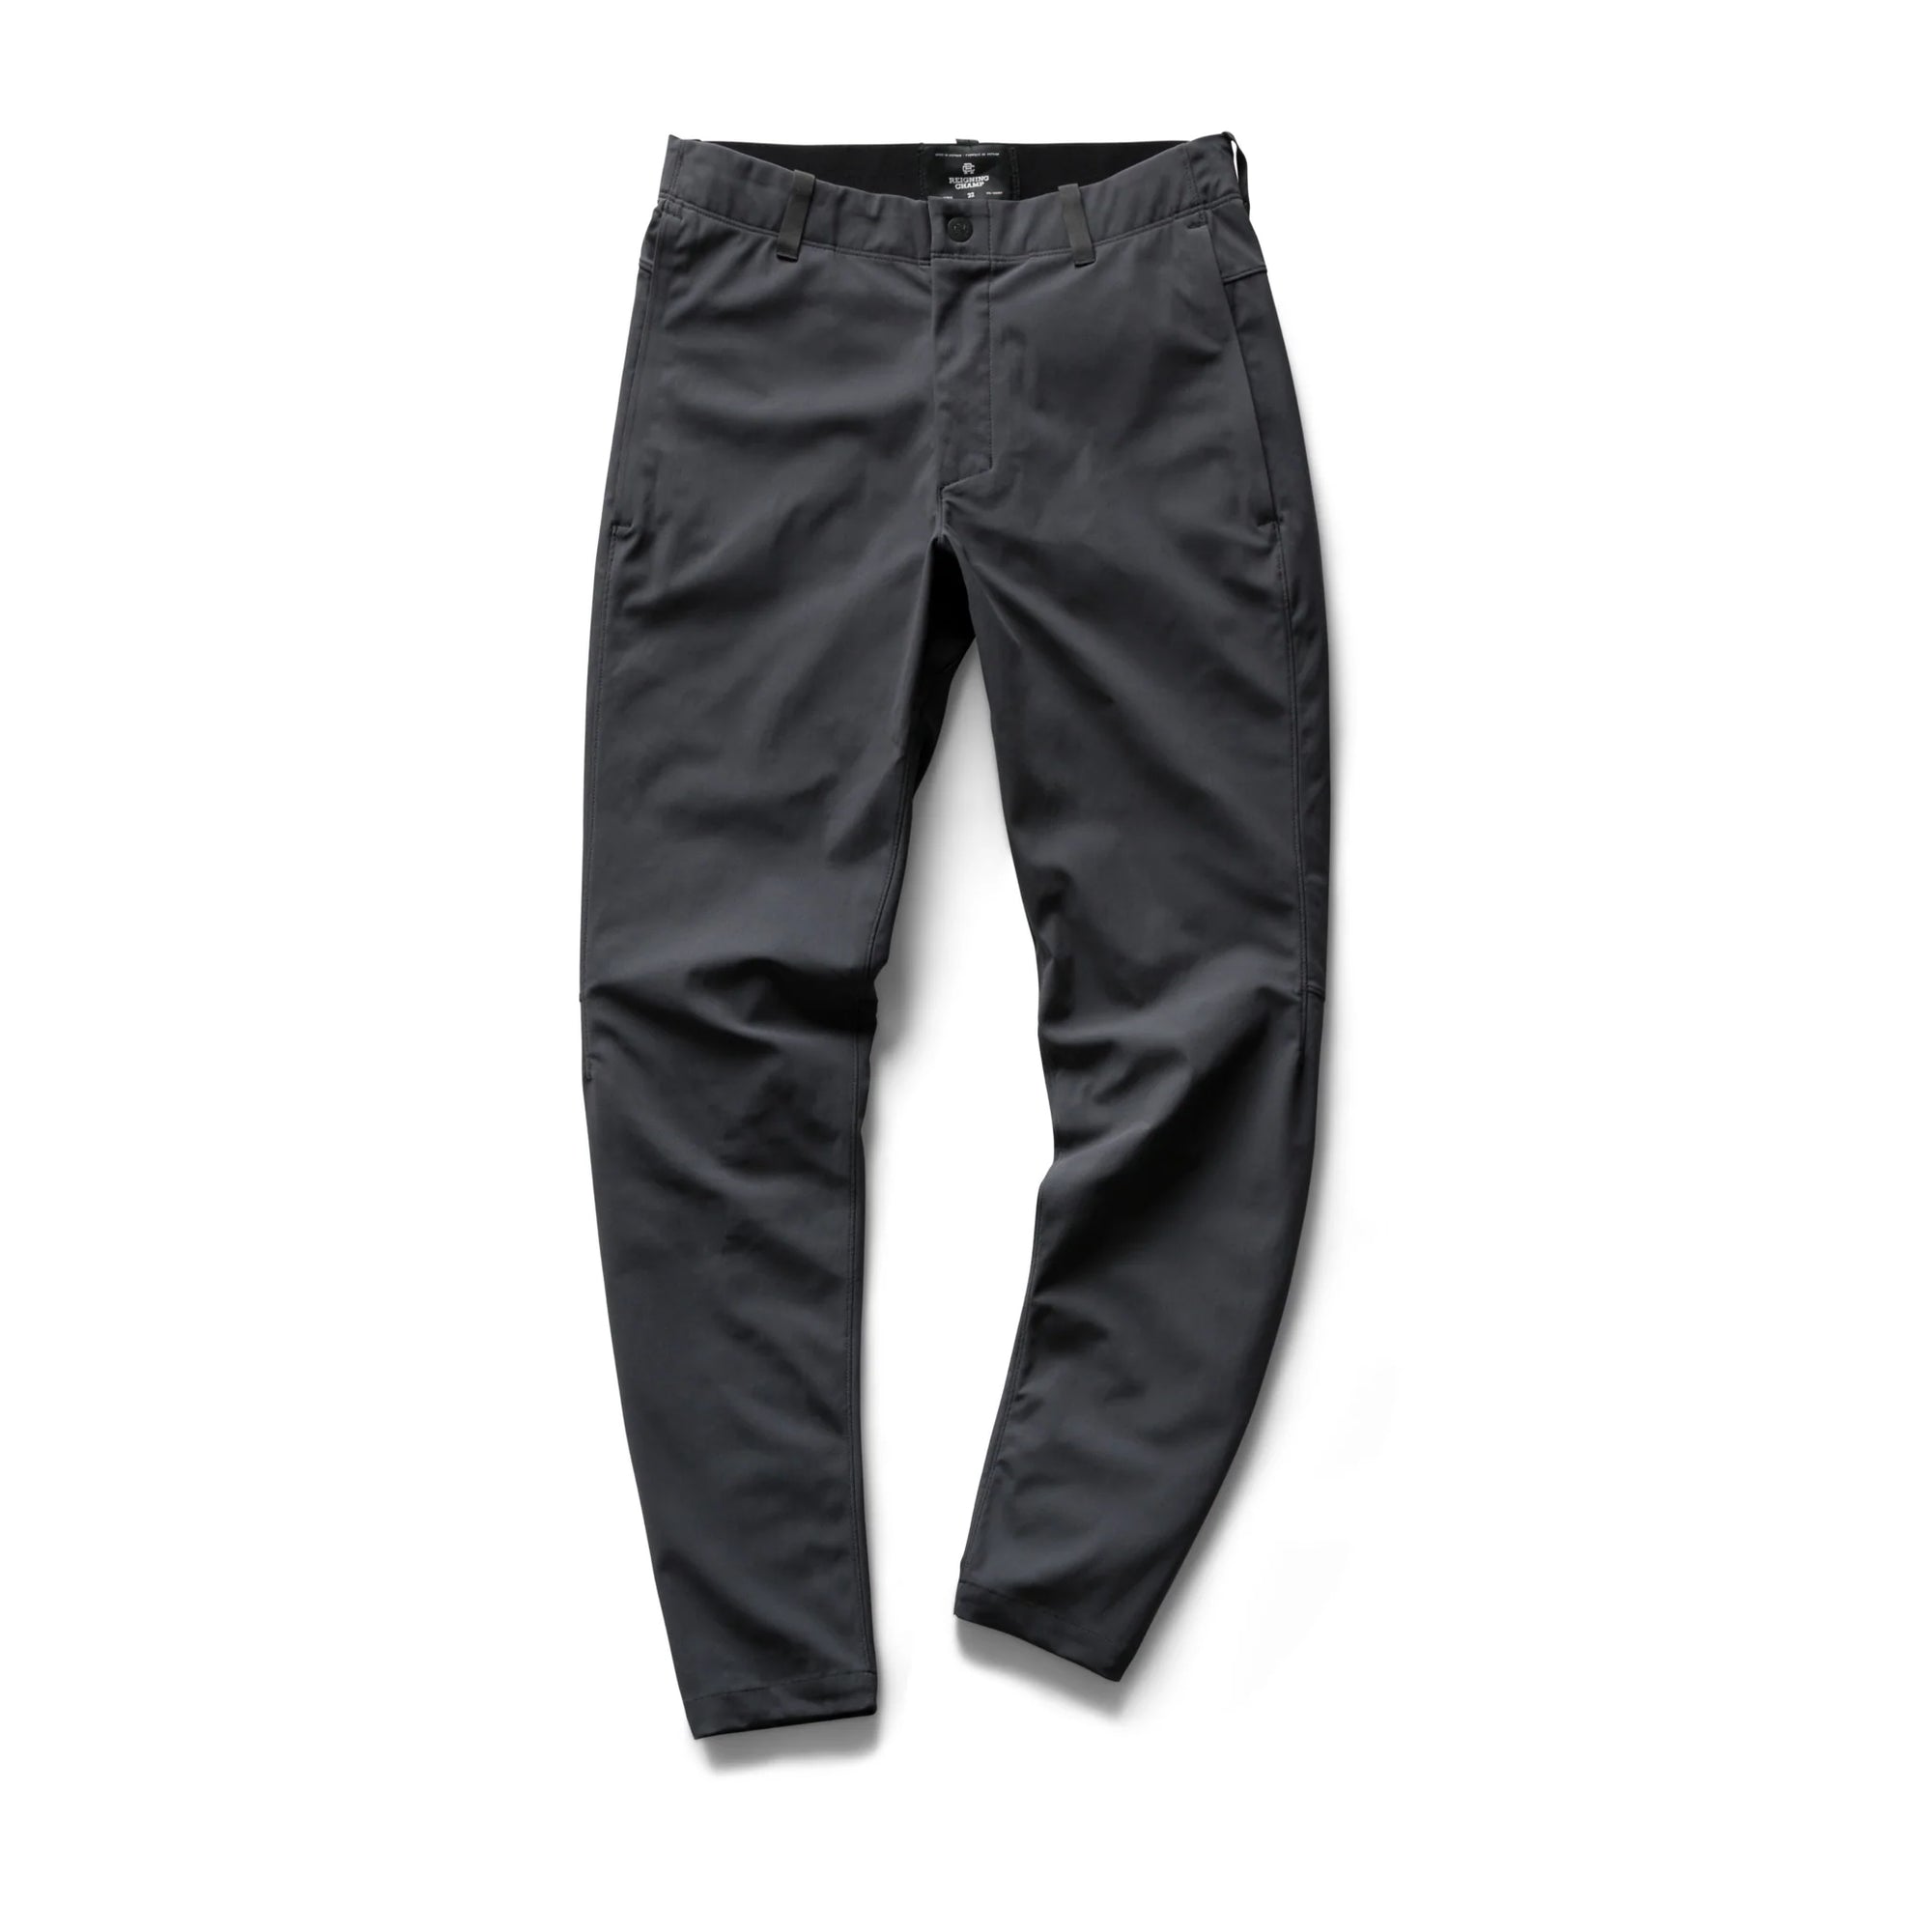 Reigning Champ Coach's Pant in Charcoal